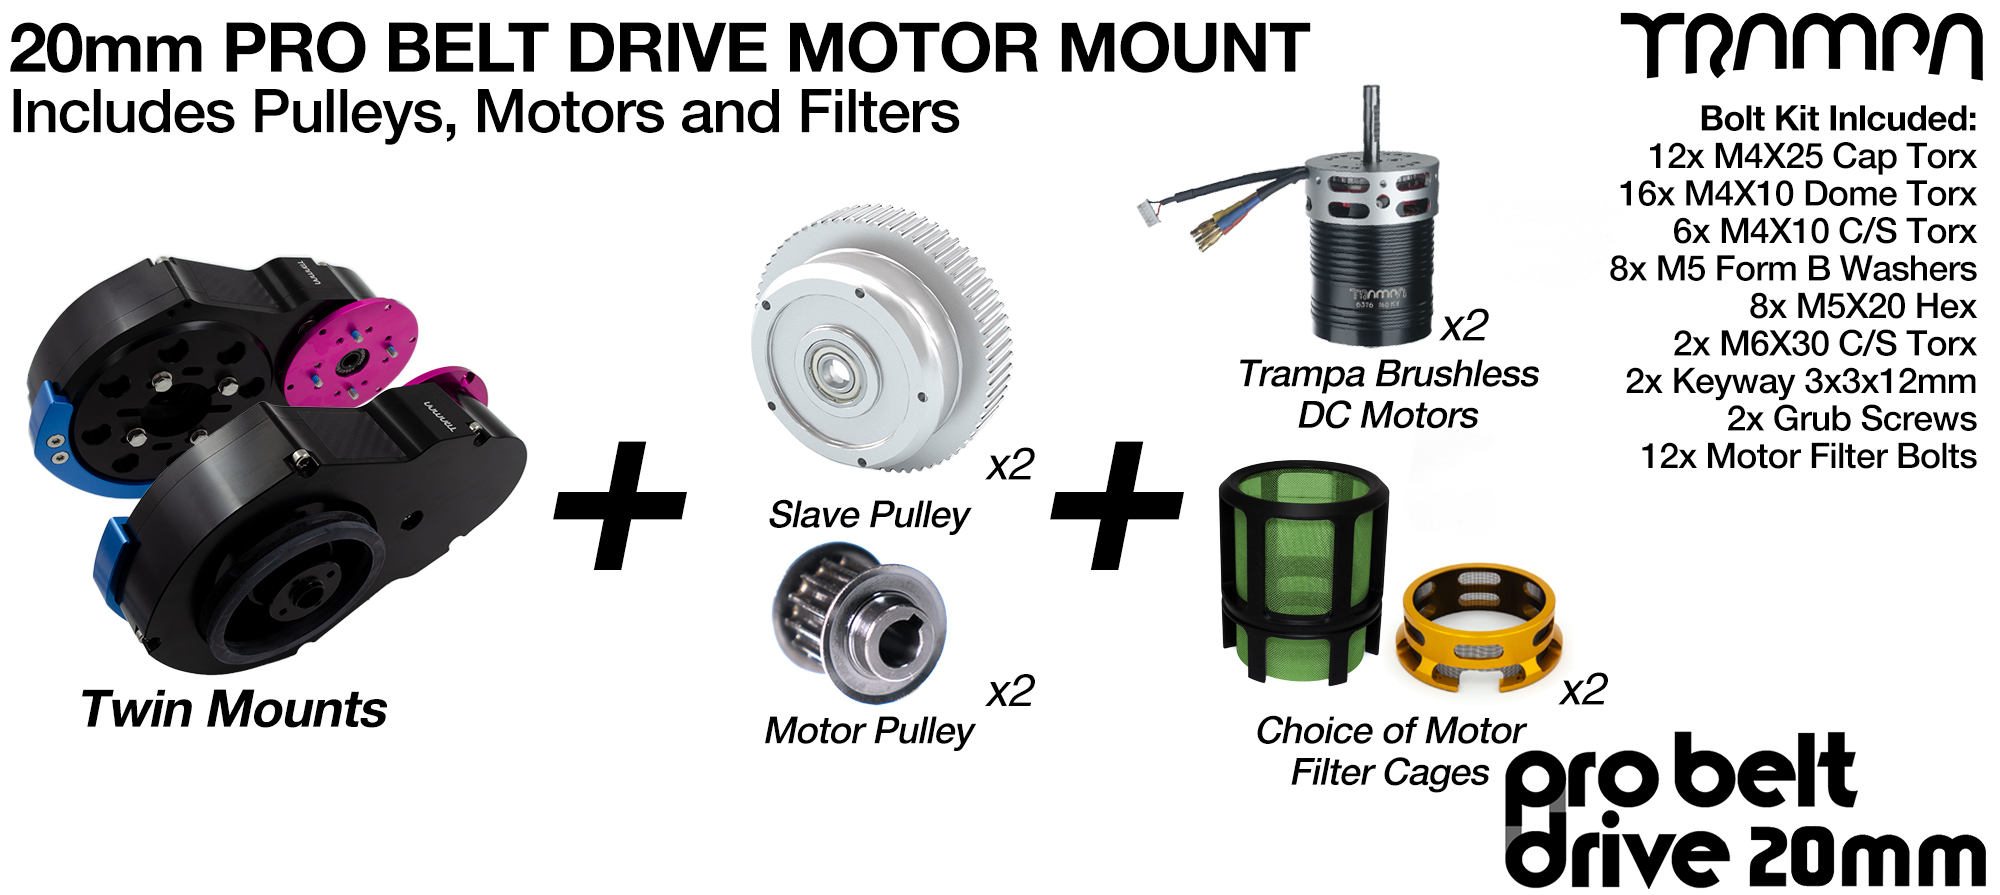 20mm PRO BELT DRIVE Motor Mounts with MOTORS PULLEYS & Motor PROTECTION FILTERS - LOADED